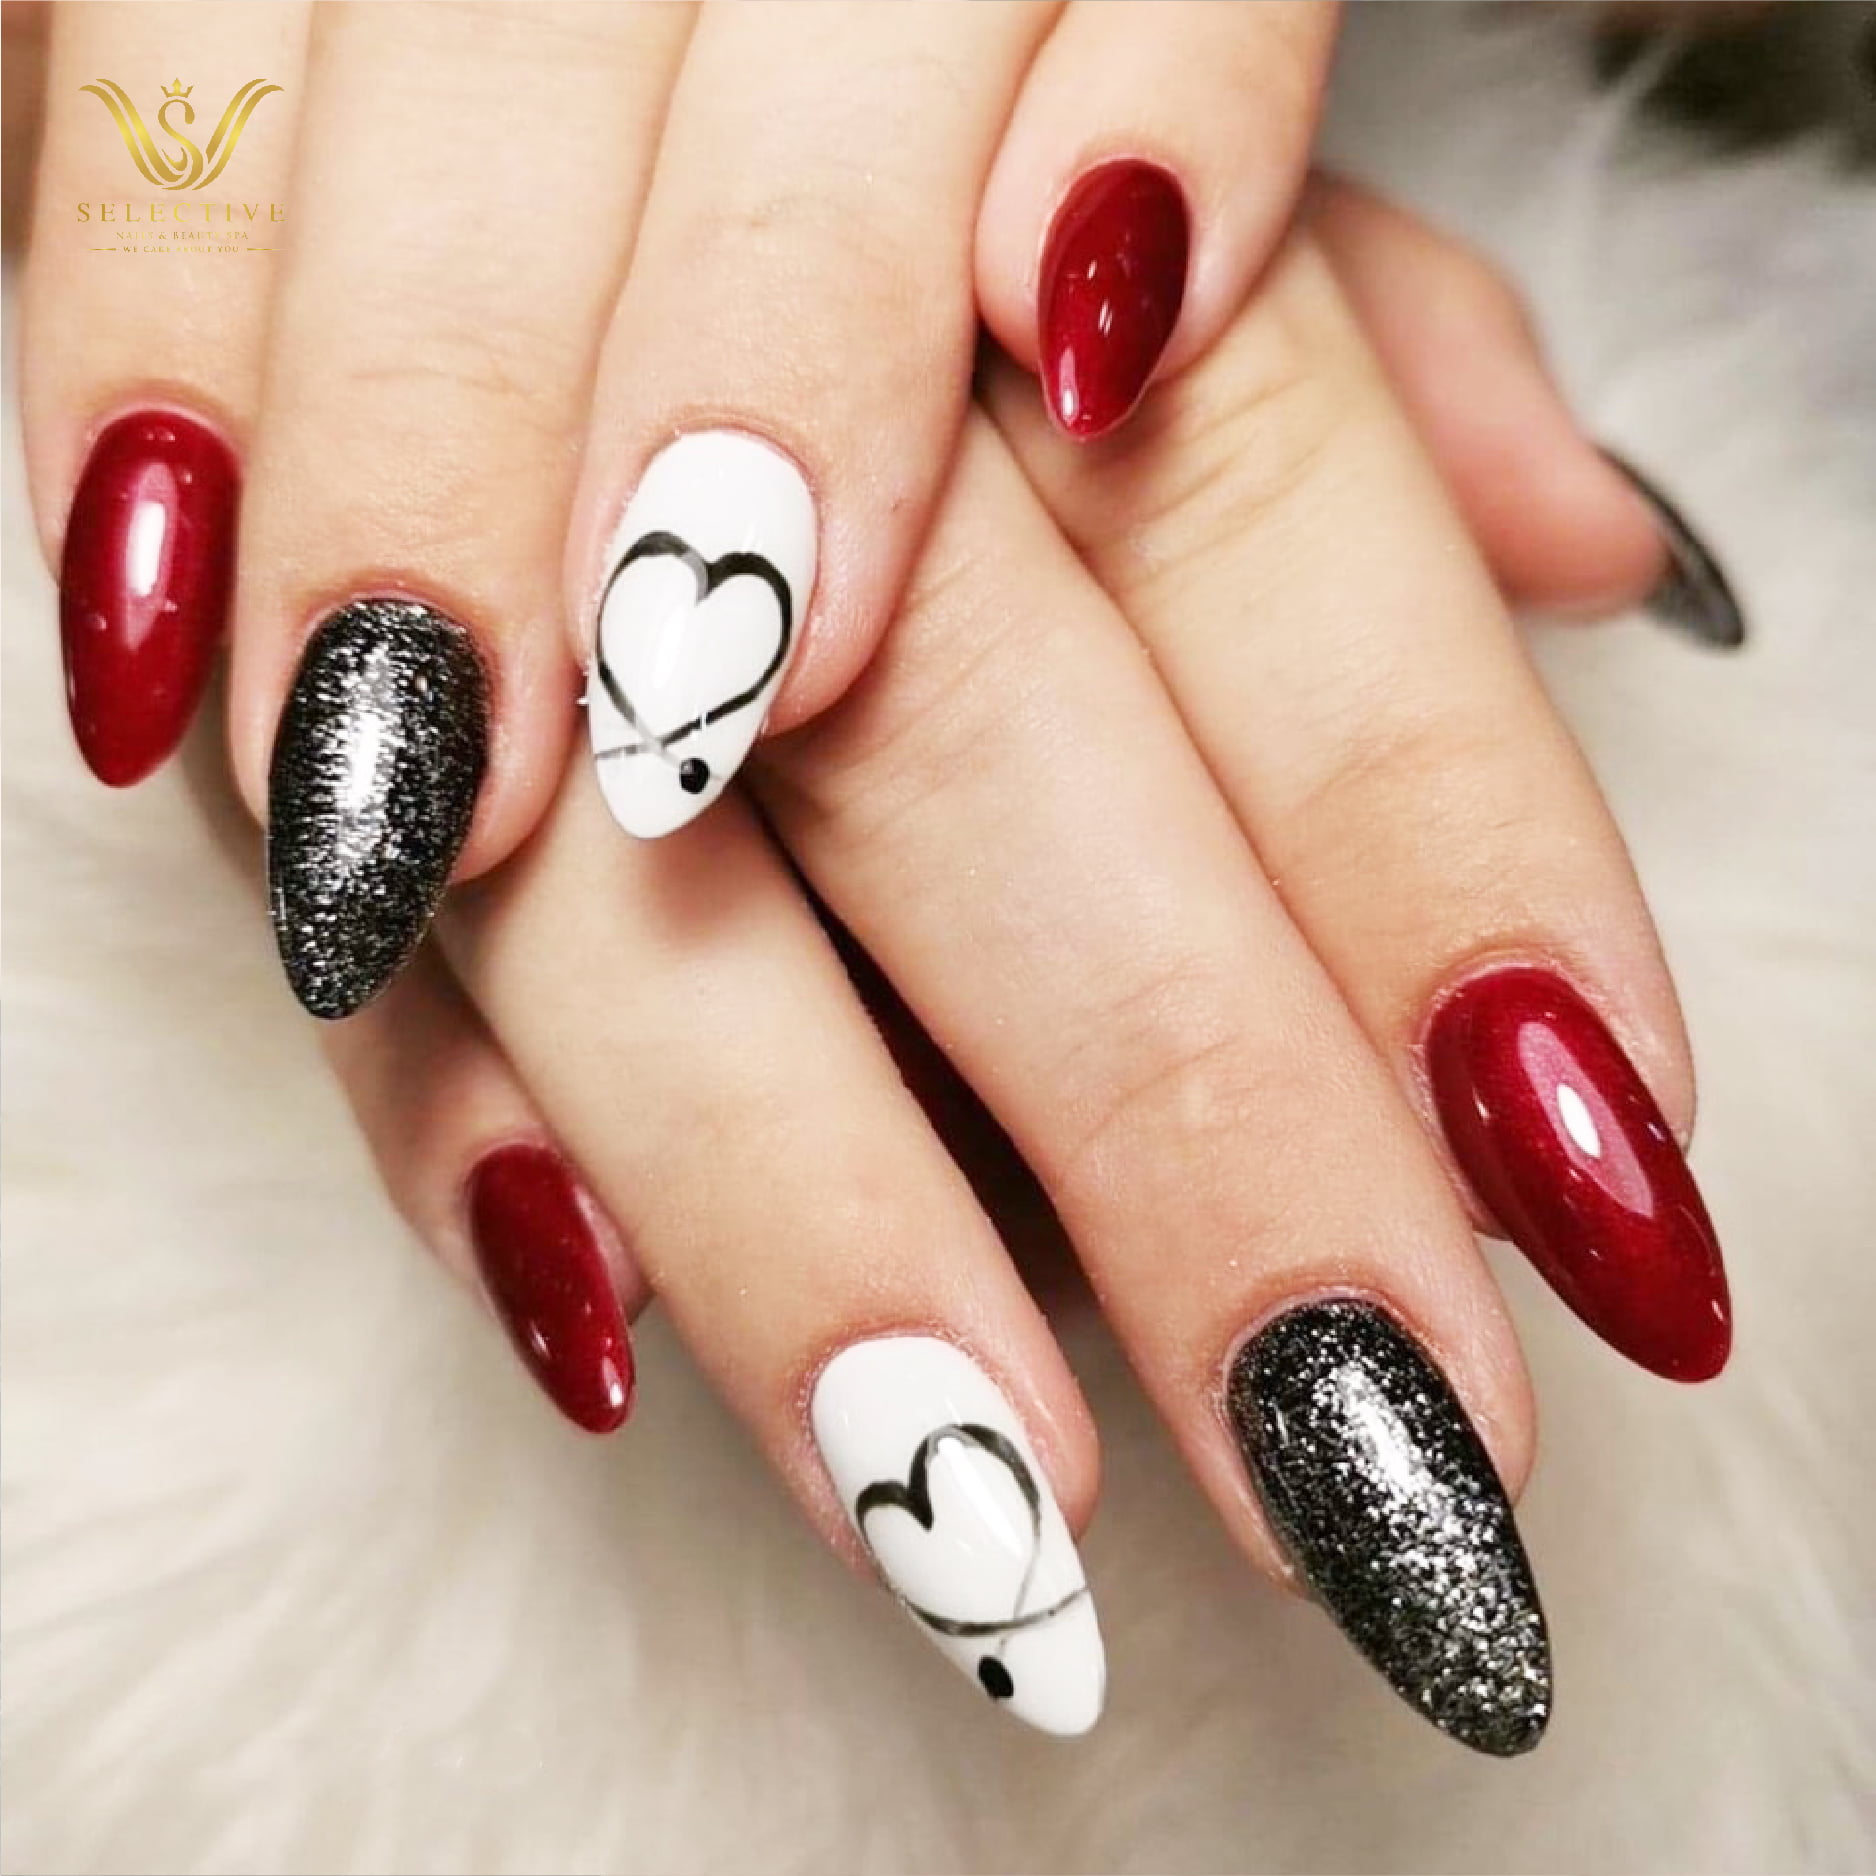 Even your crush will fall when he sees these attractive nails